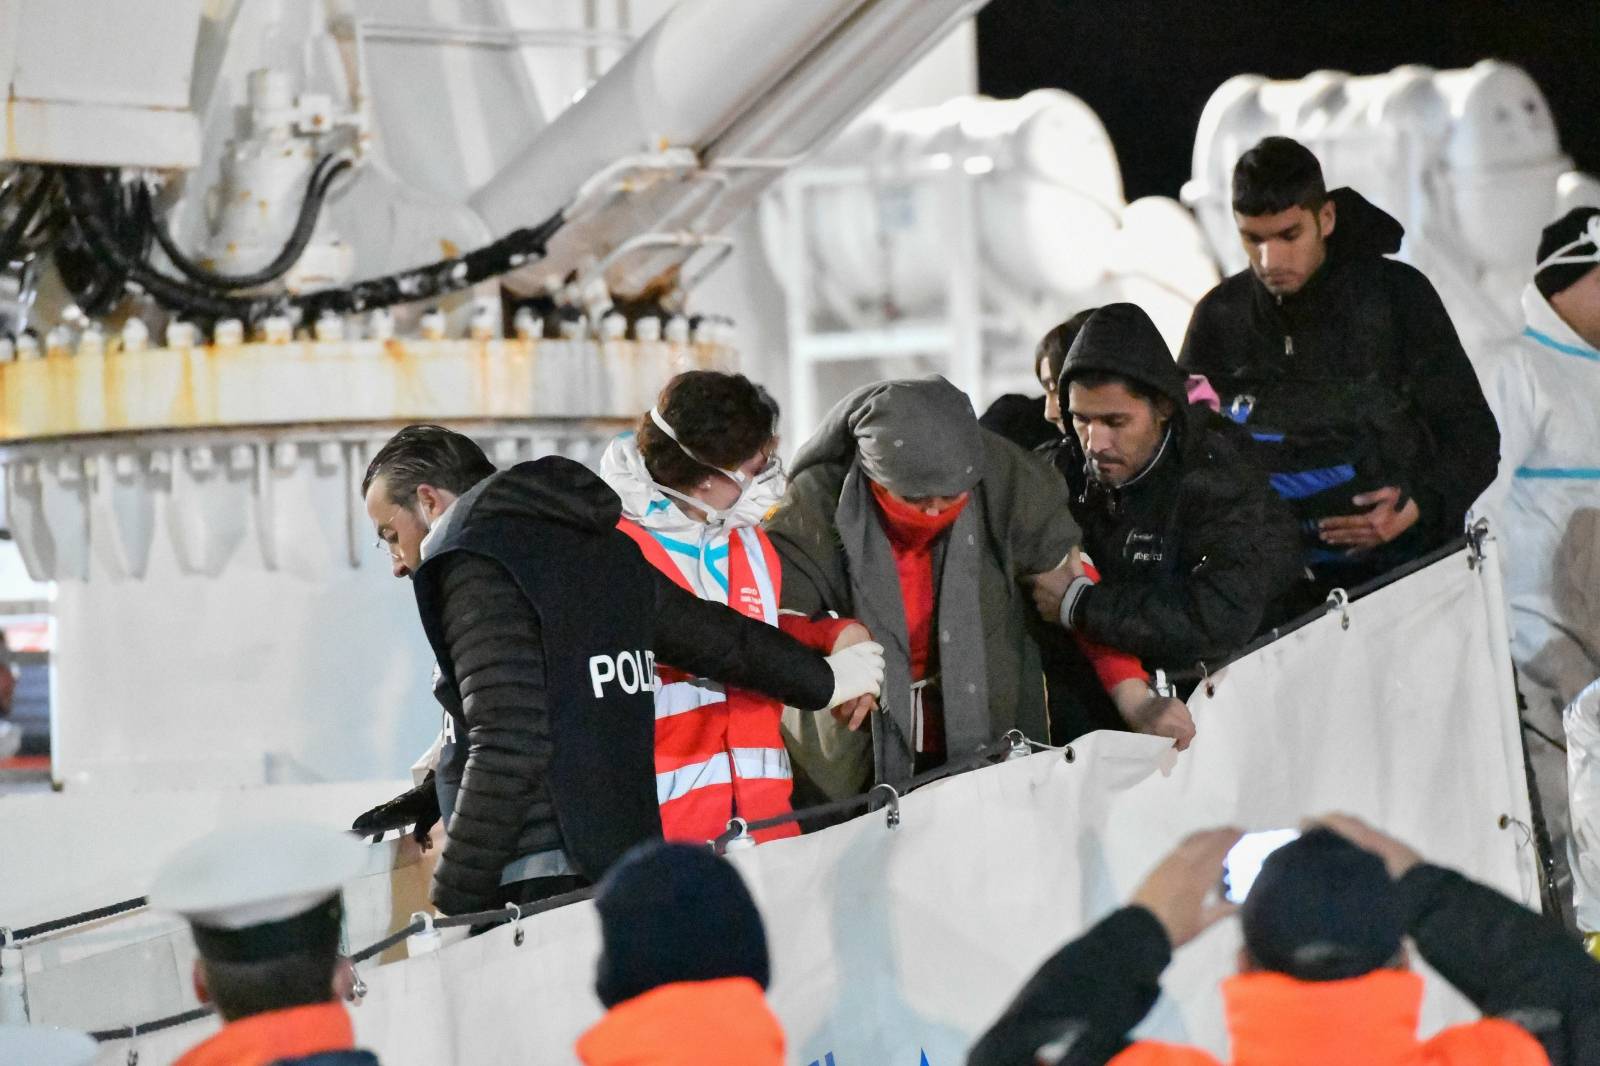 Croton landed 277 migrants from ship Eighteen